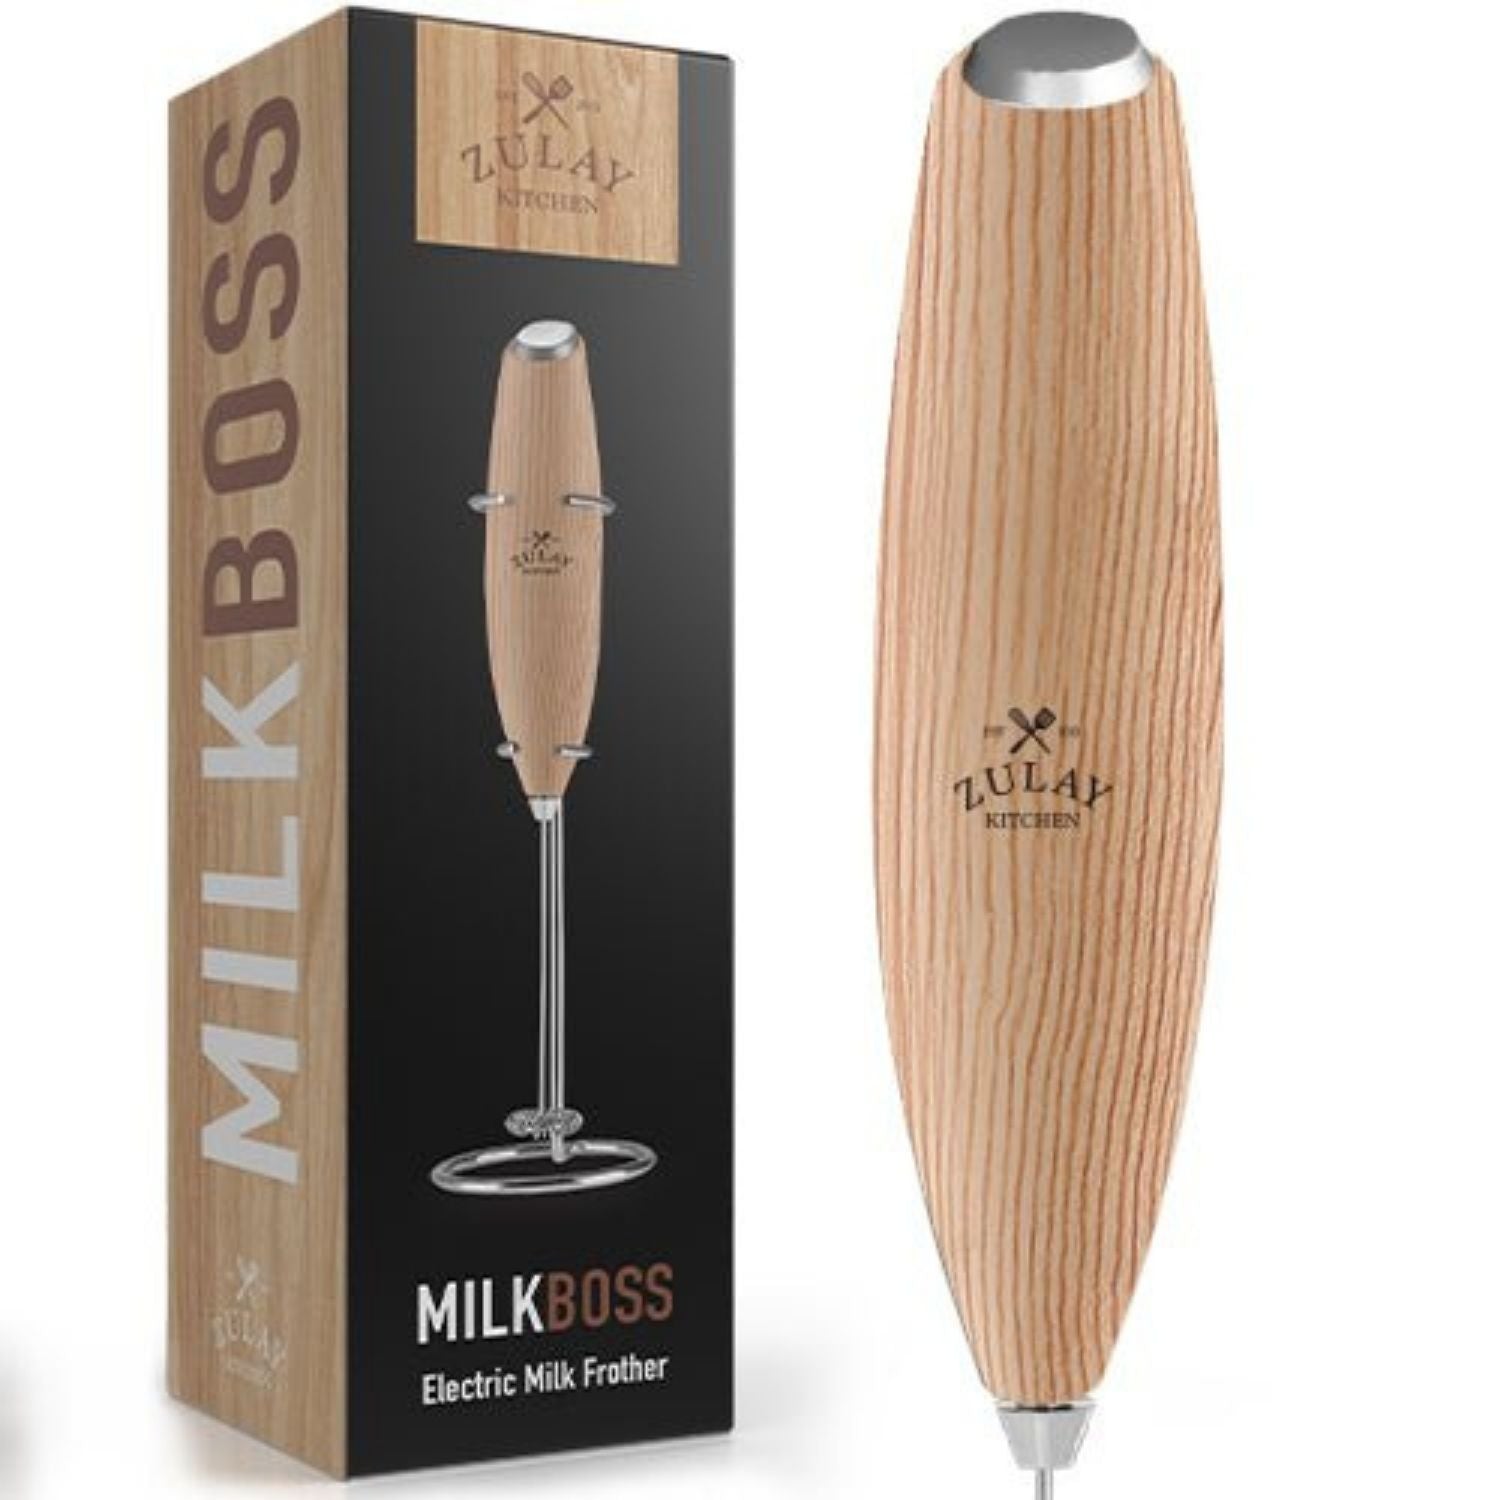 Zulay Kitchen MILK BOSS Milk Frother With Stand - Marble, 1 - Kroger